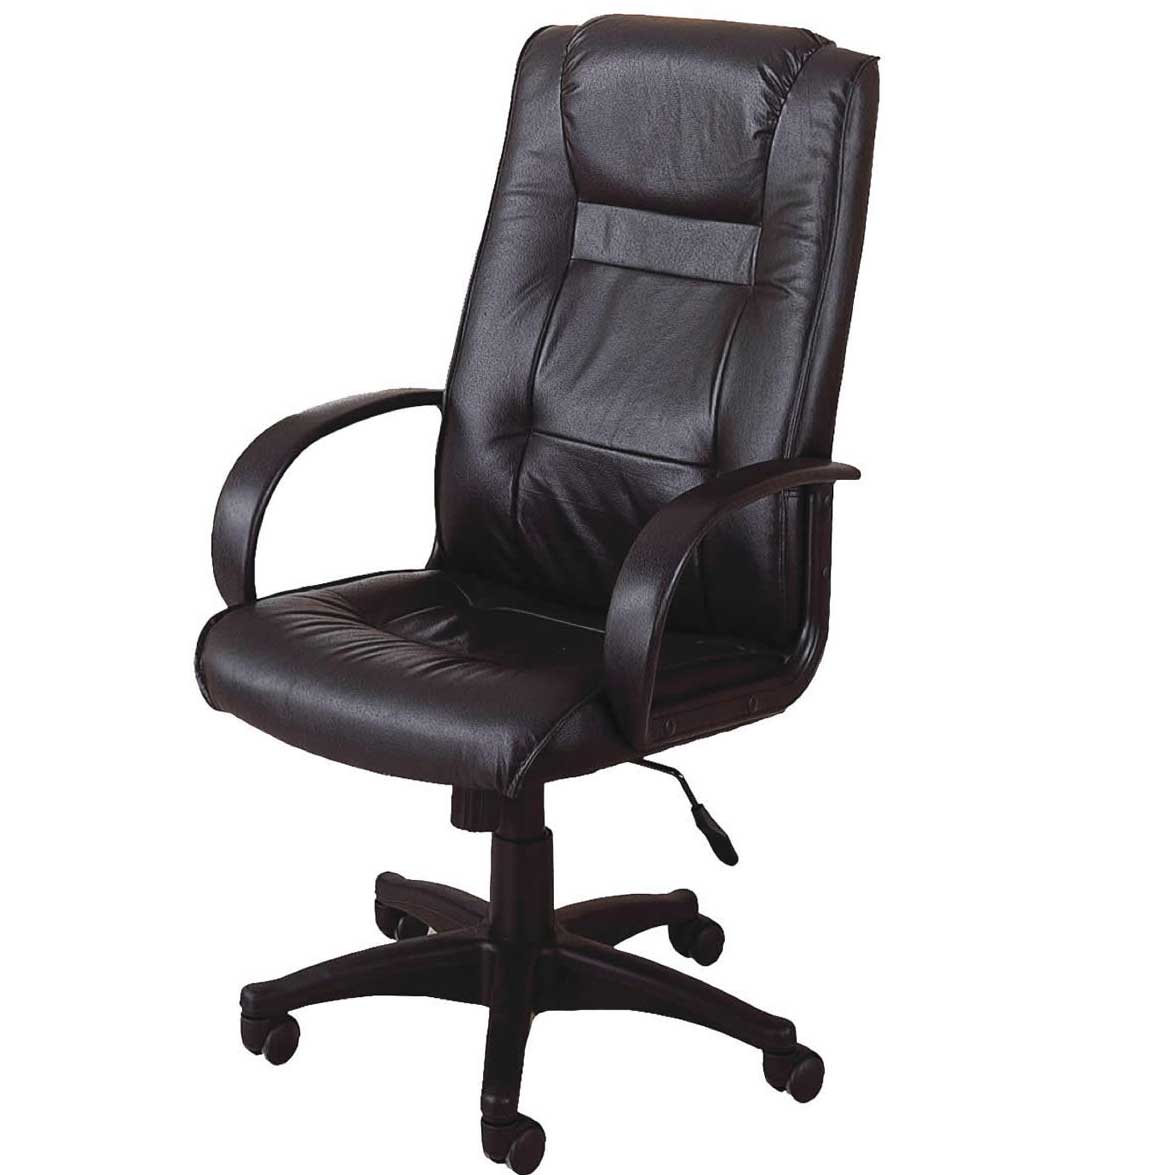 adjustable office chair high back leather adjustable height home office chair